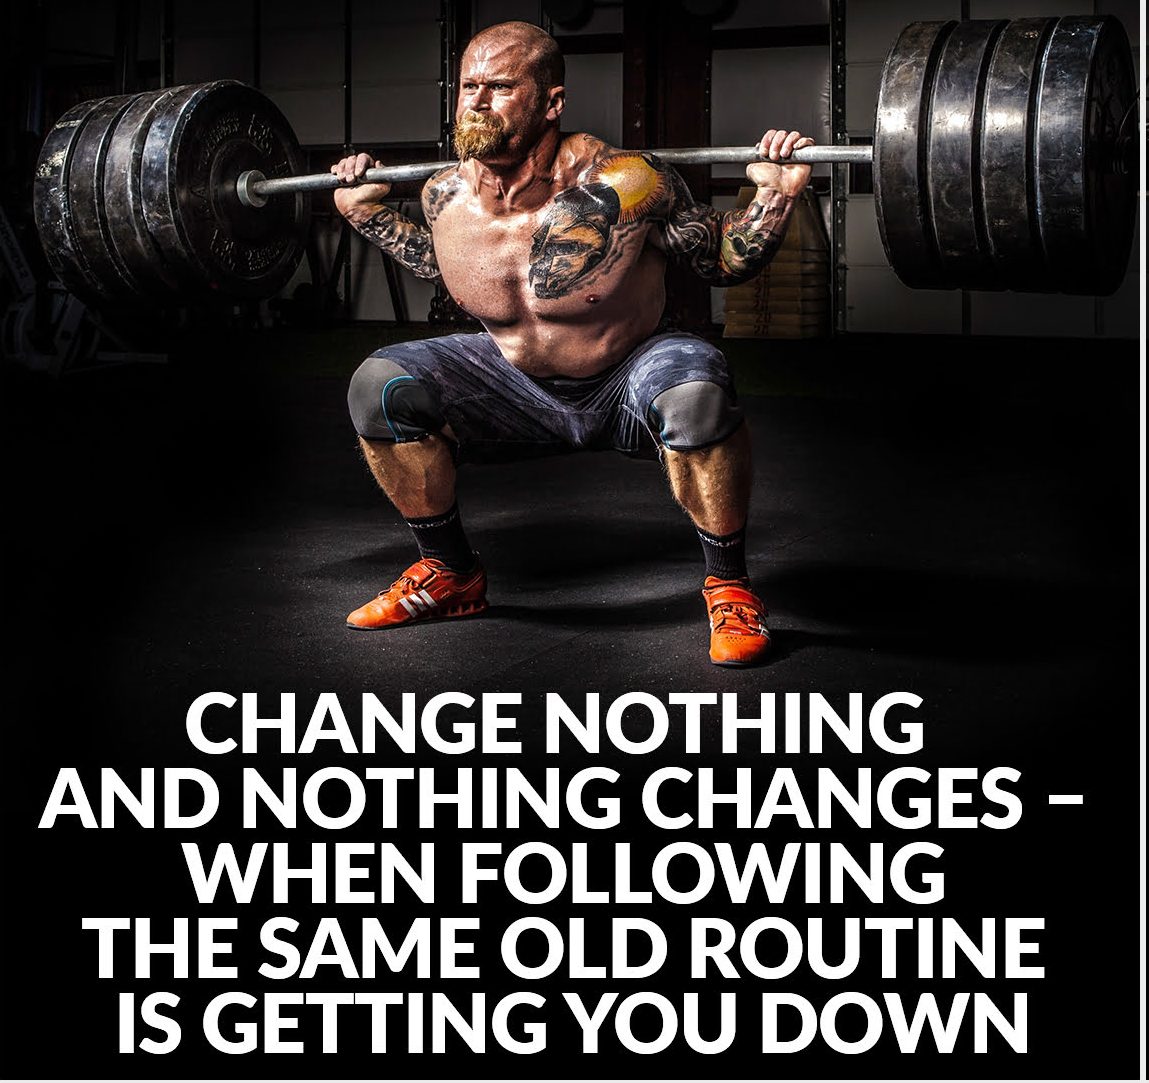 30 Inspirational Gym Quotes To Keep You Going